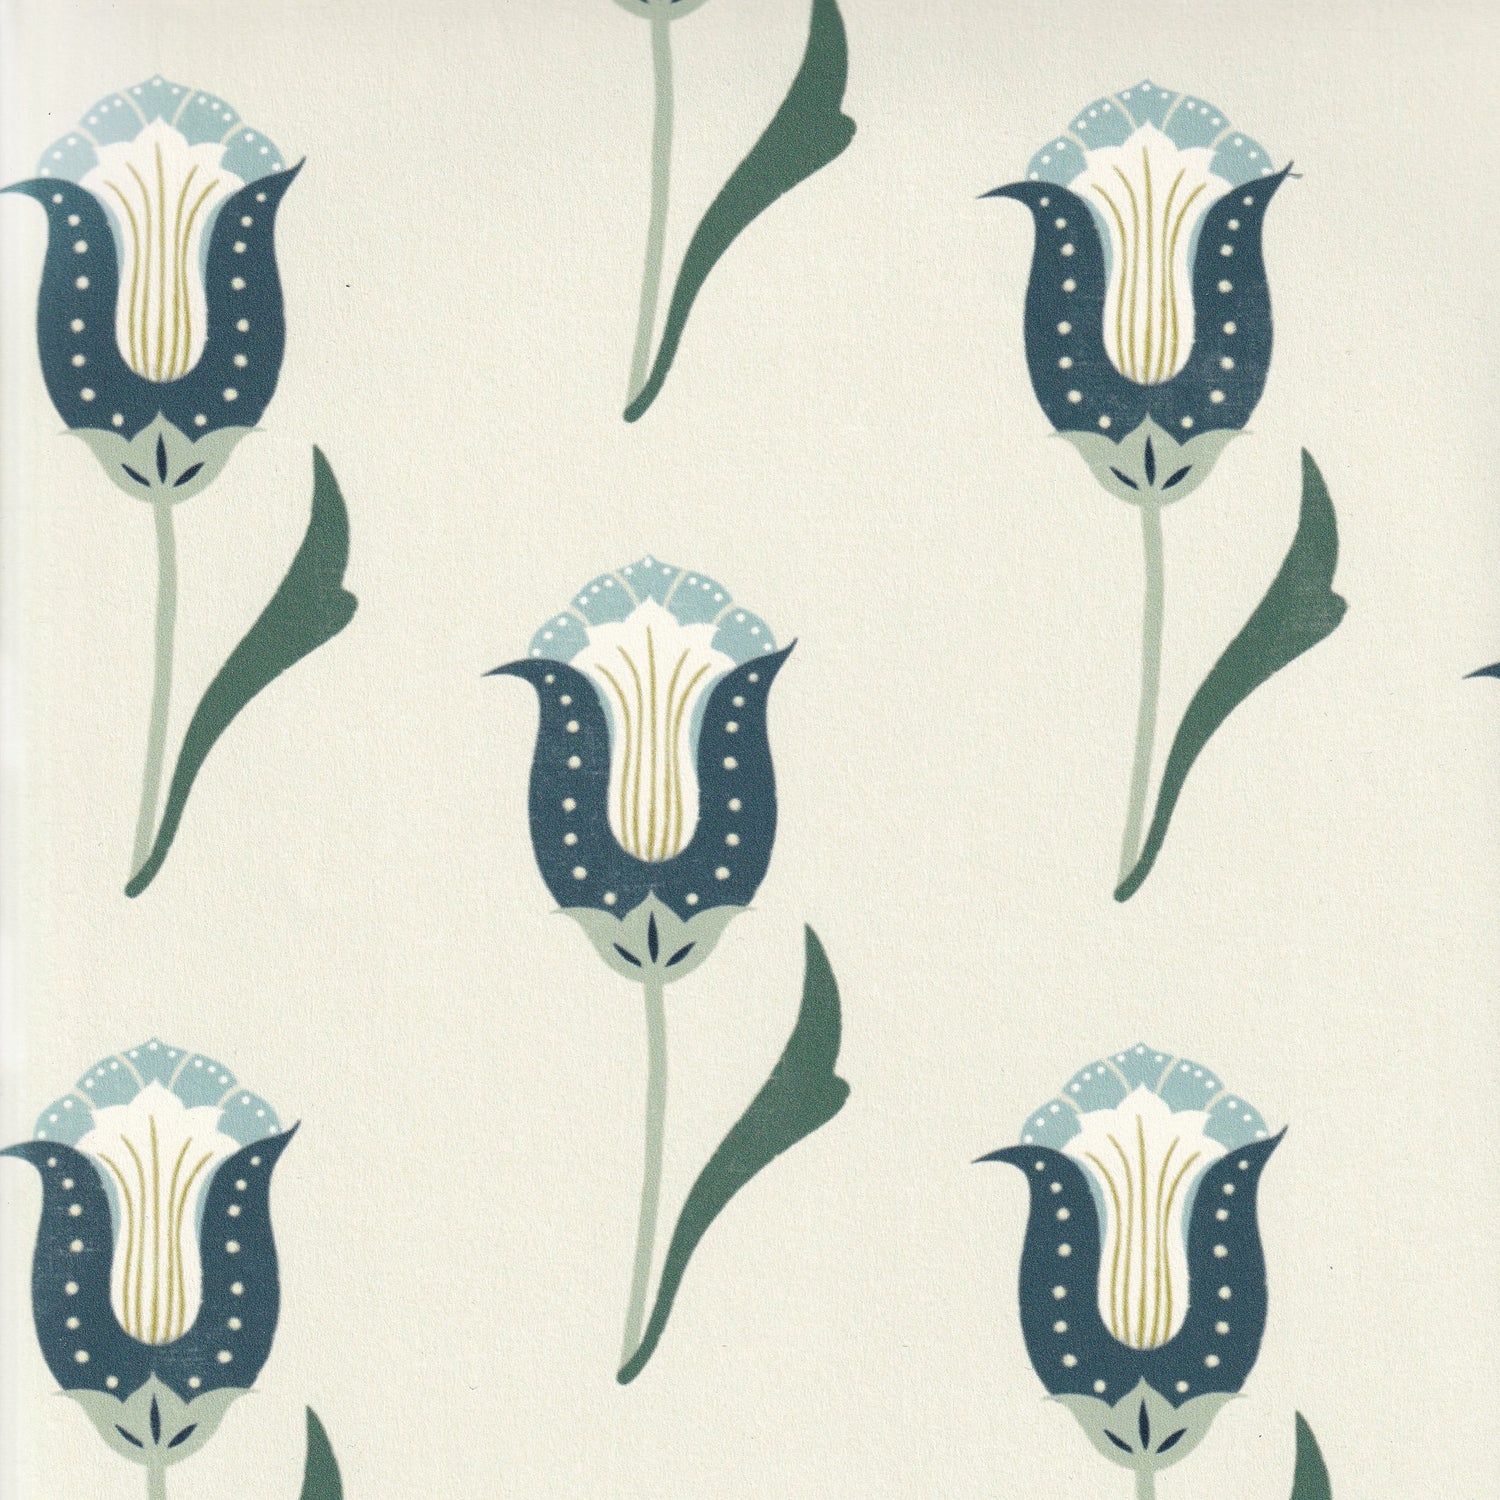 Abstract floral with varying green tones wallpaper swatch